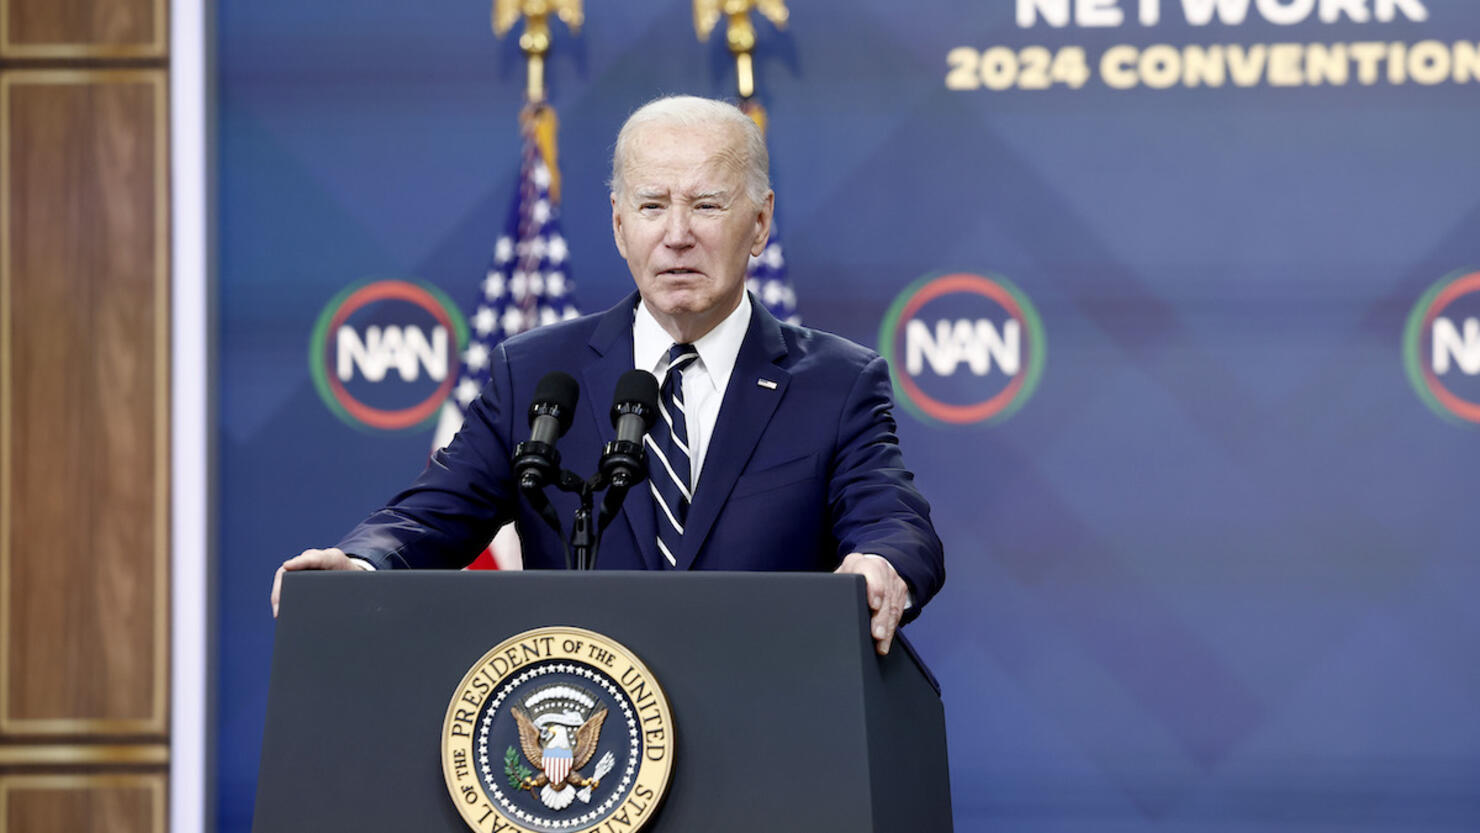 President Biden Delivers Virtual Remarks To The National Action Network Convention